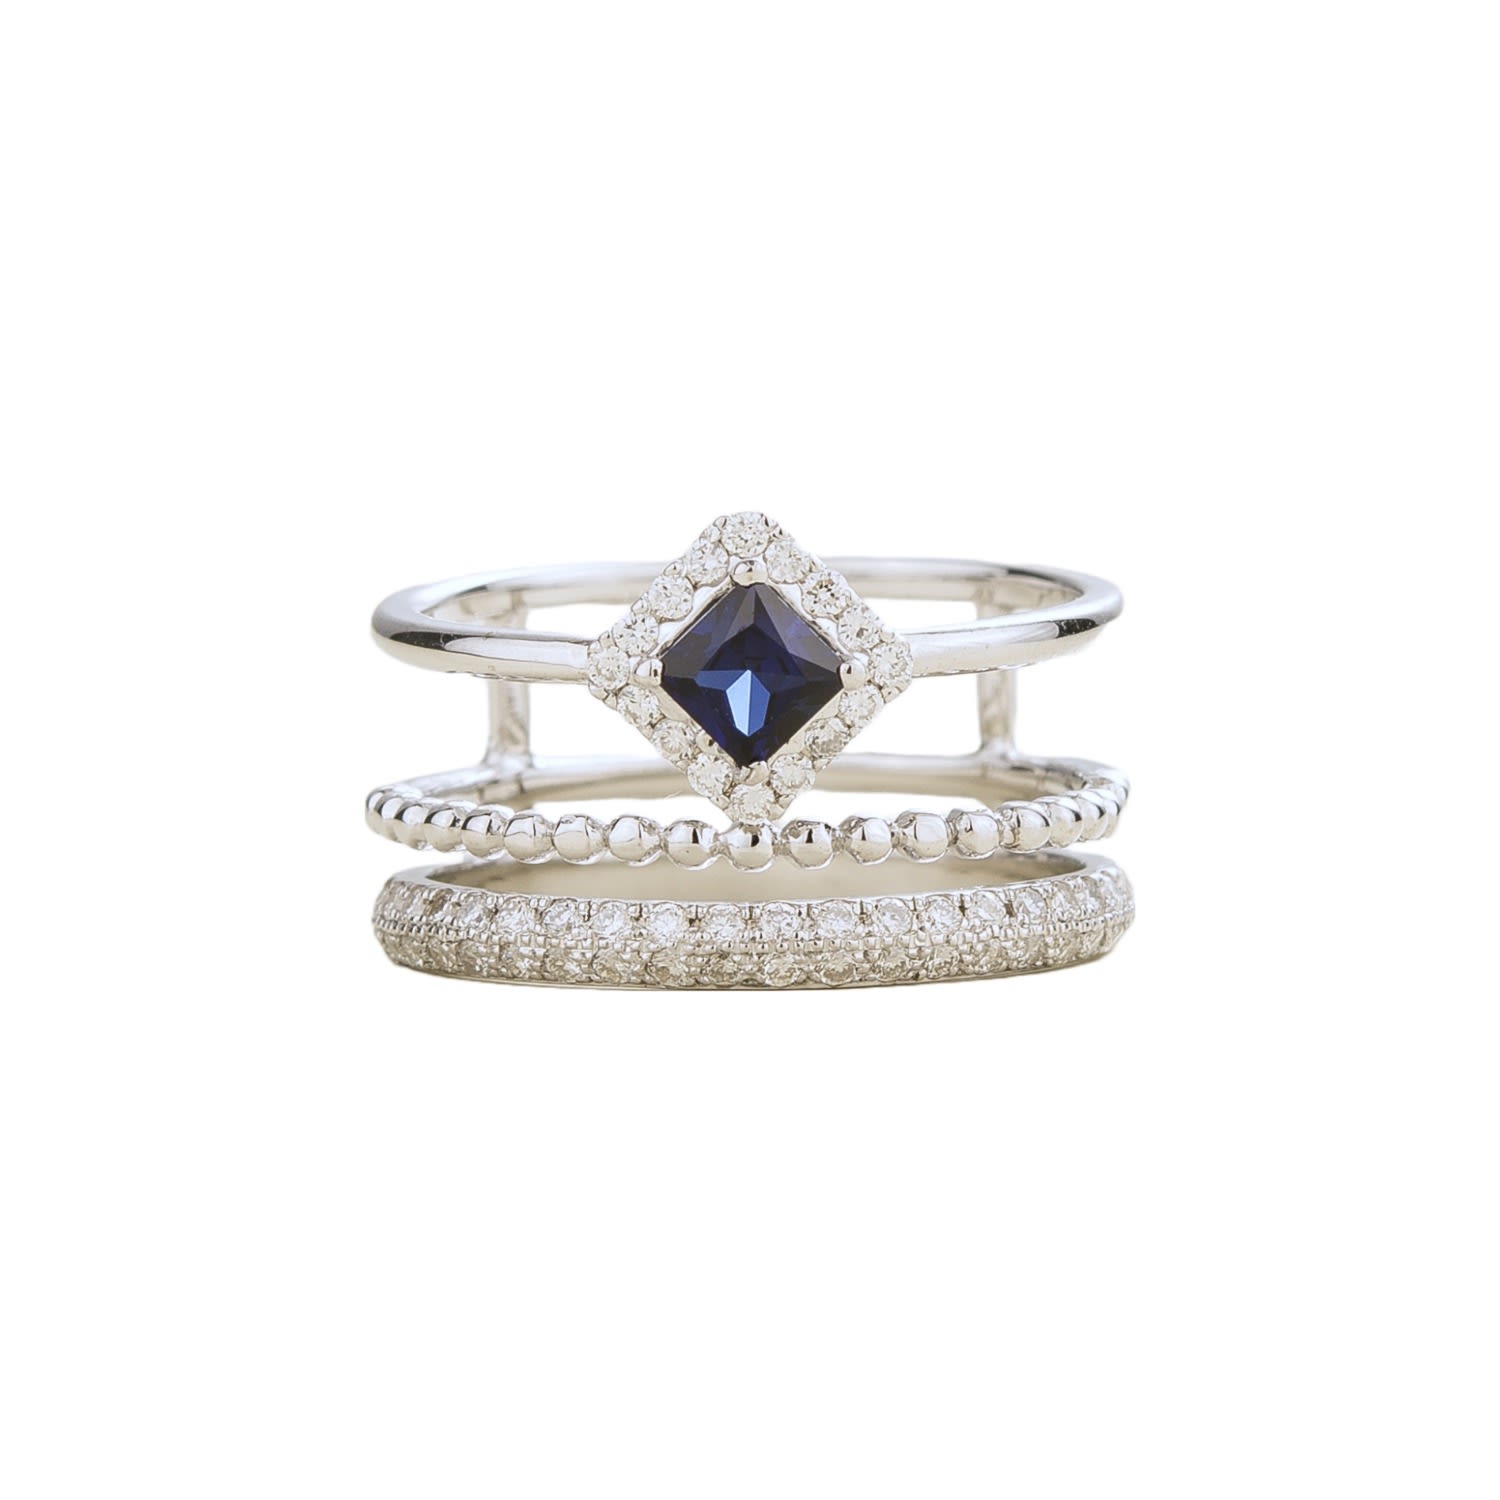 Juvetti Women's Blue / White / Silver Amici White Gold Ring In Blue Sapphire And Diamond In Metallic